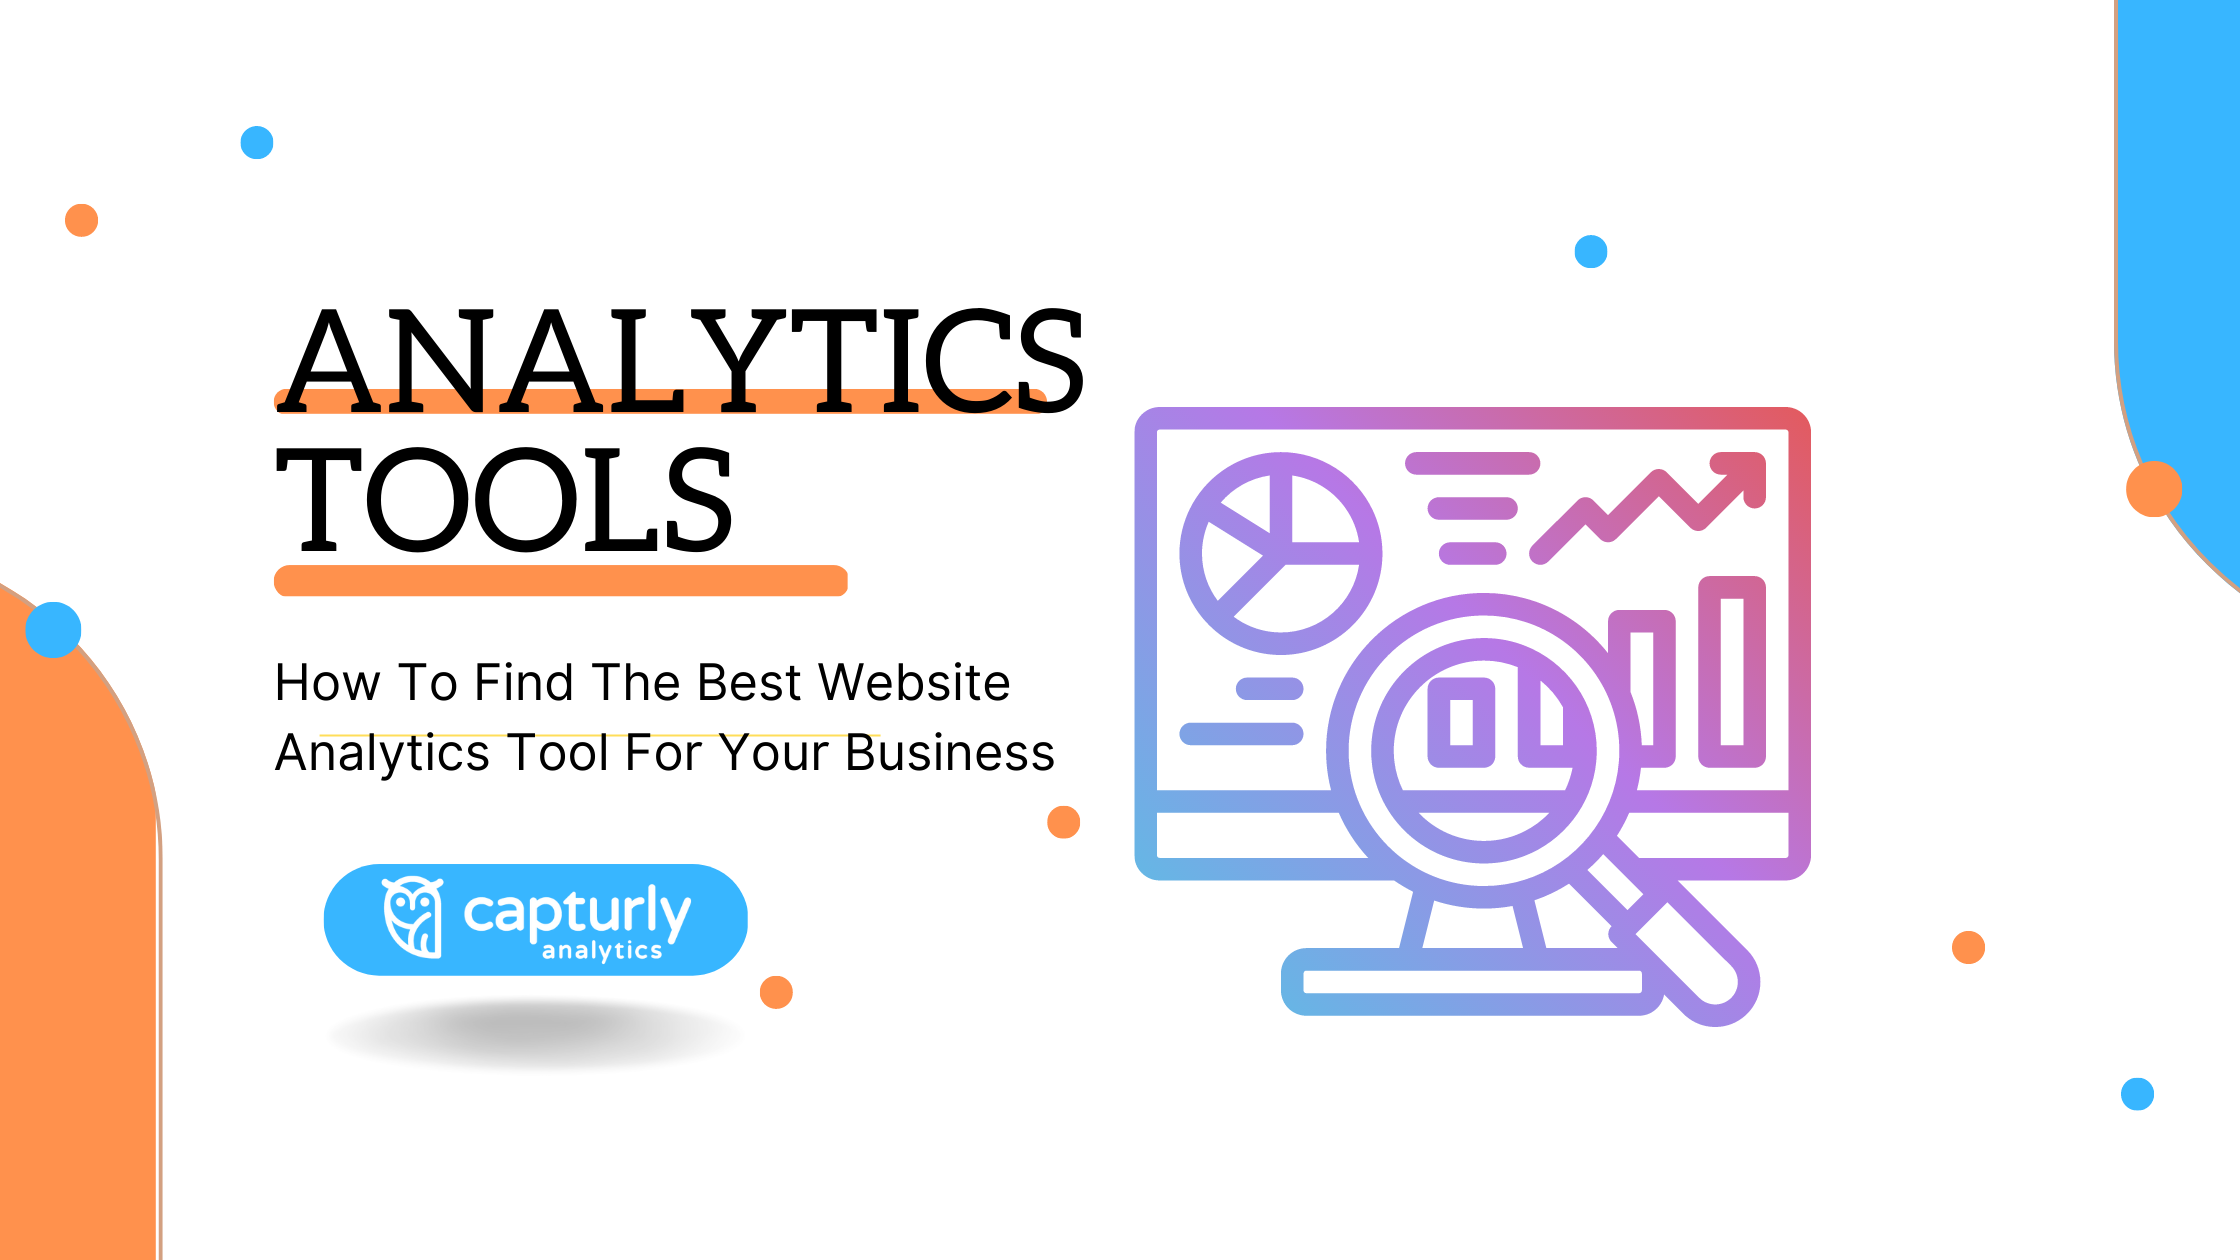 How To Find The Best Website Analytics Tool For Your Business